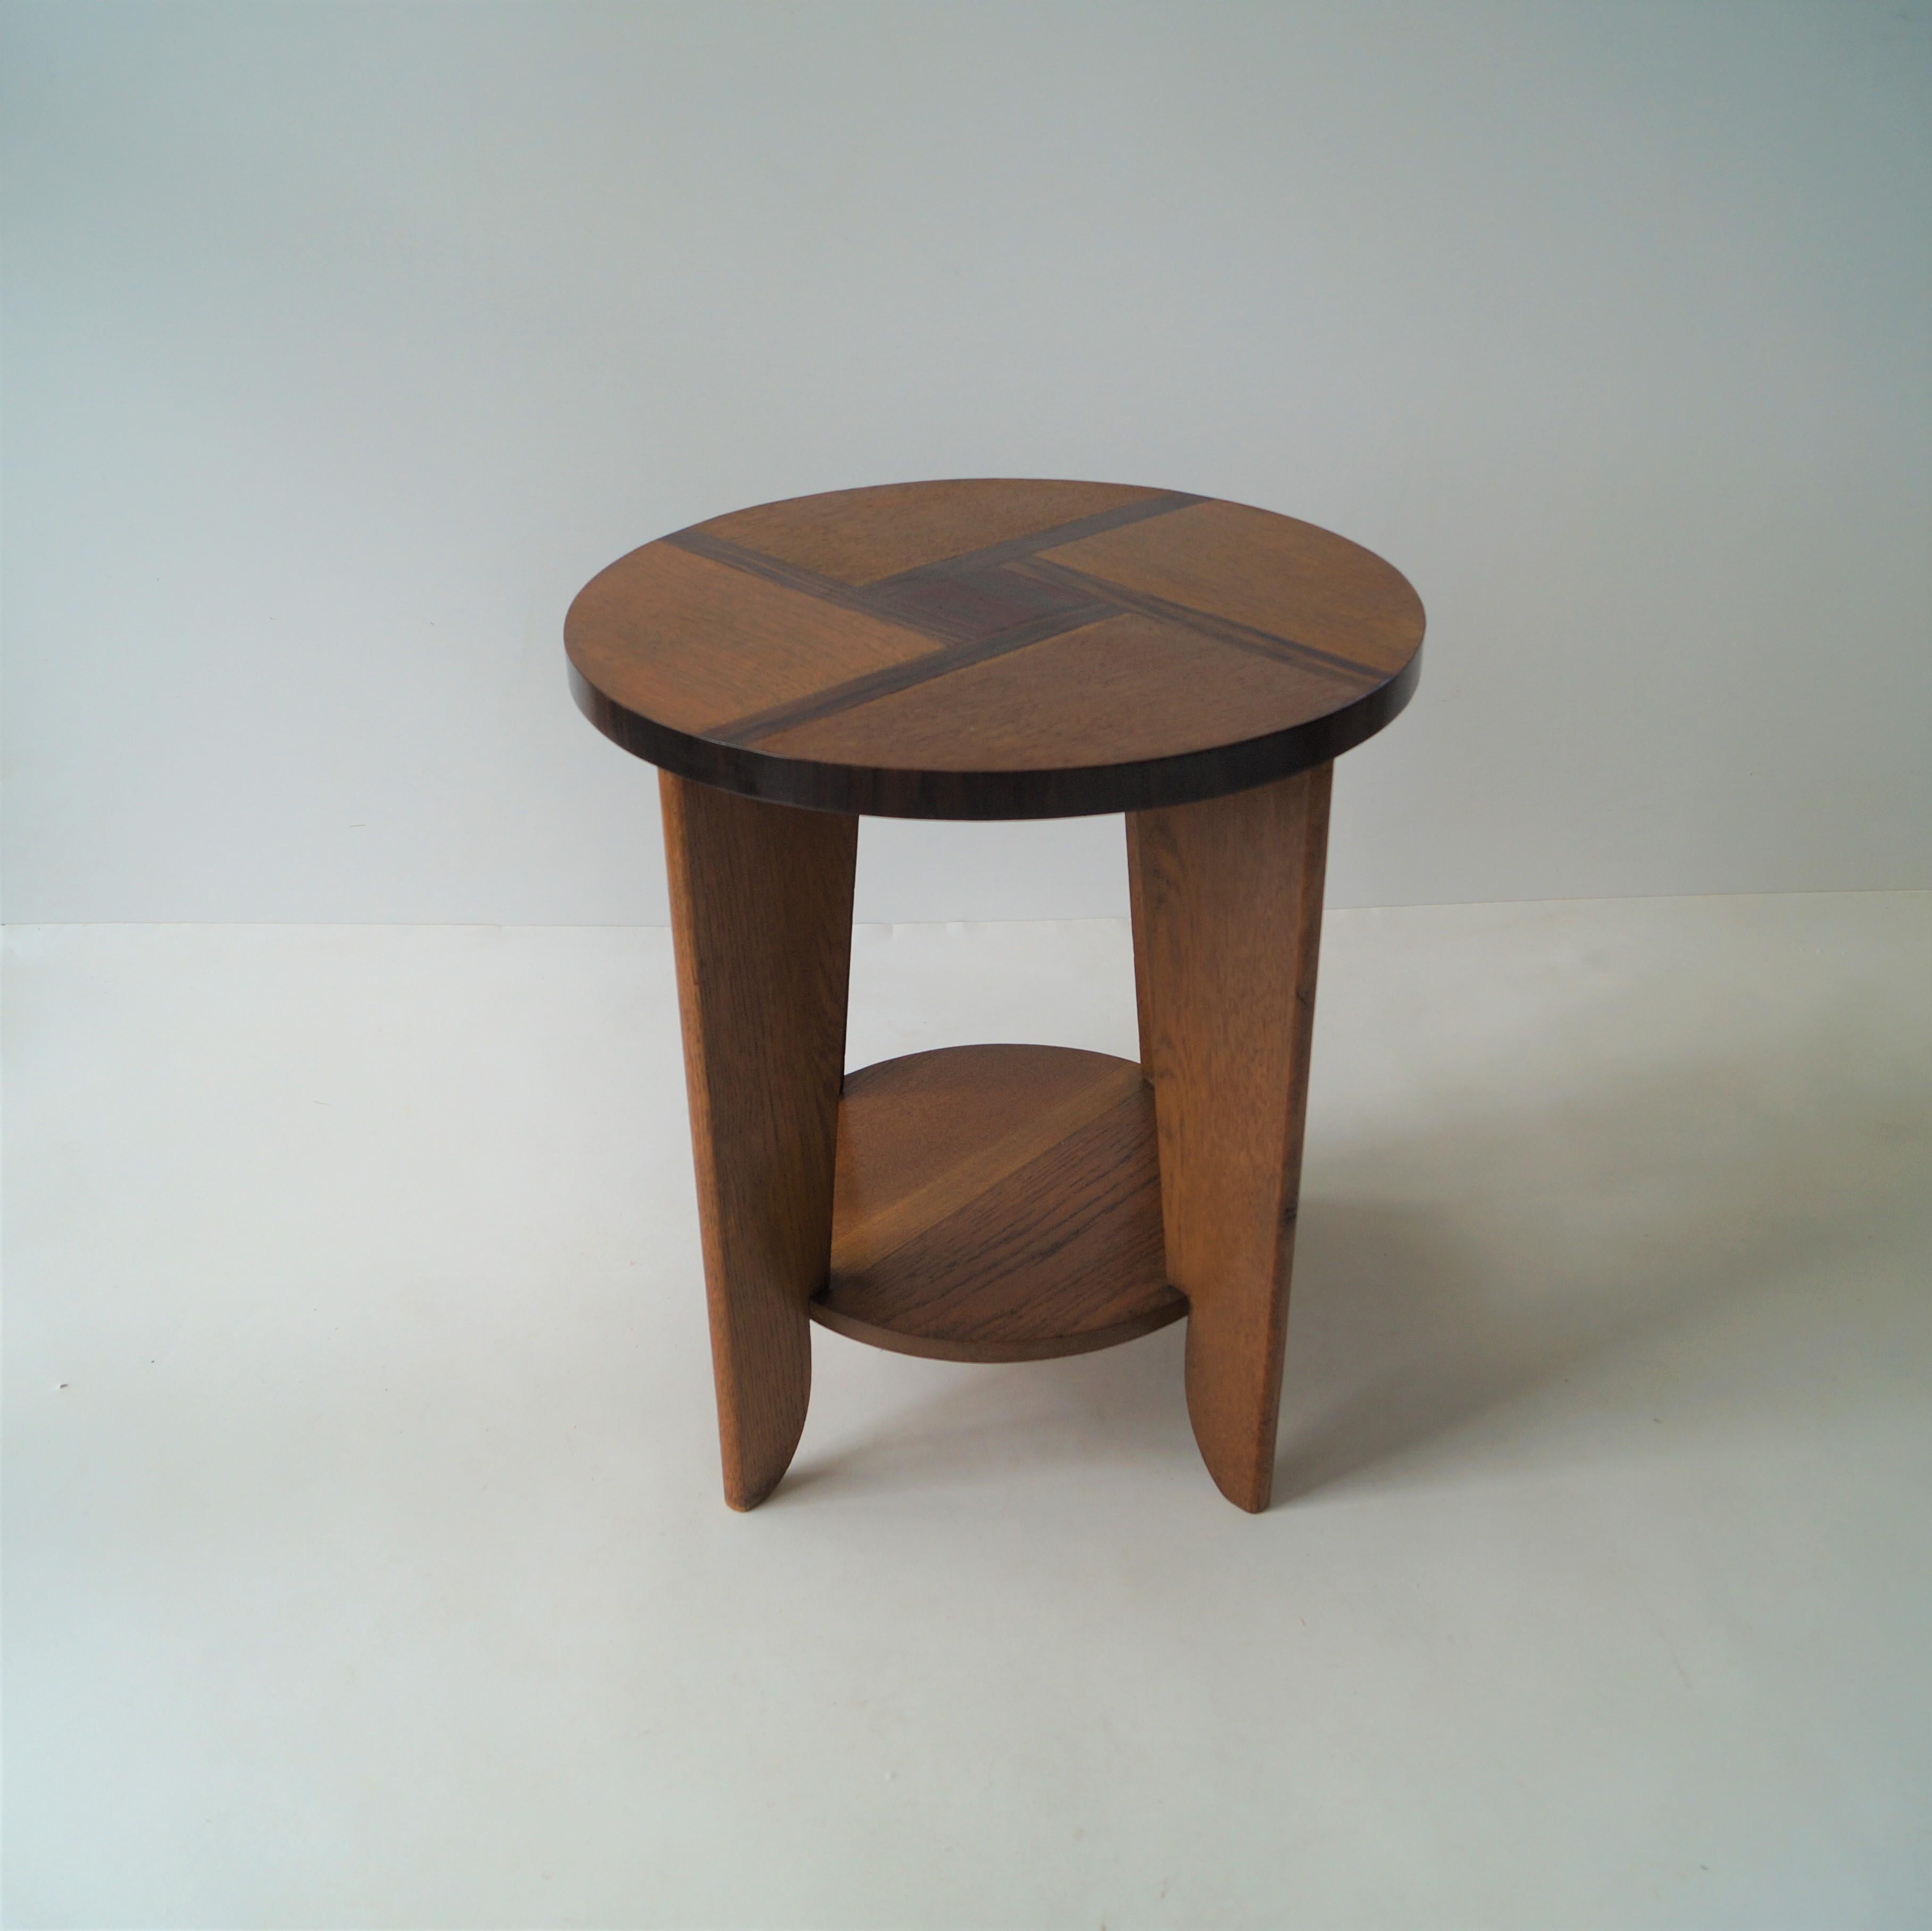 Dutch Art Deco Occasional Table Haagse School, 1930s For Sale 7